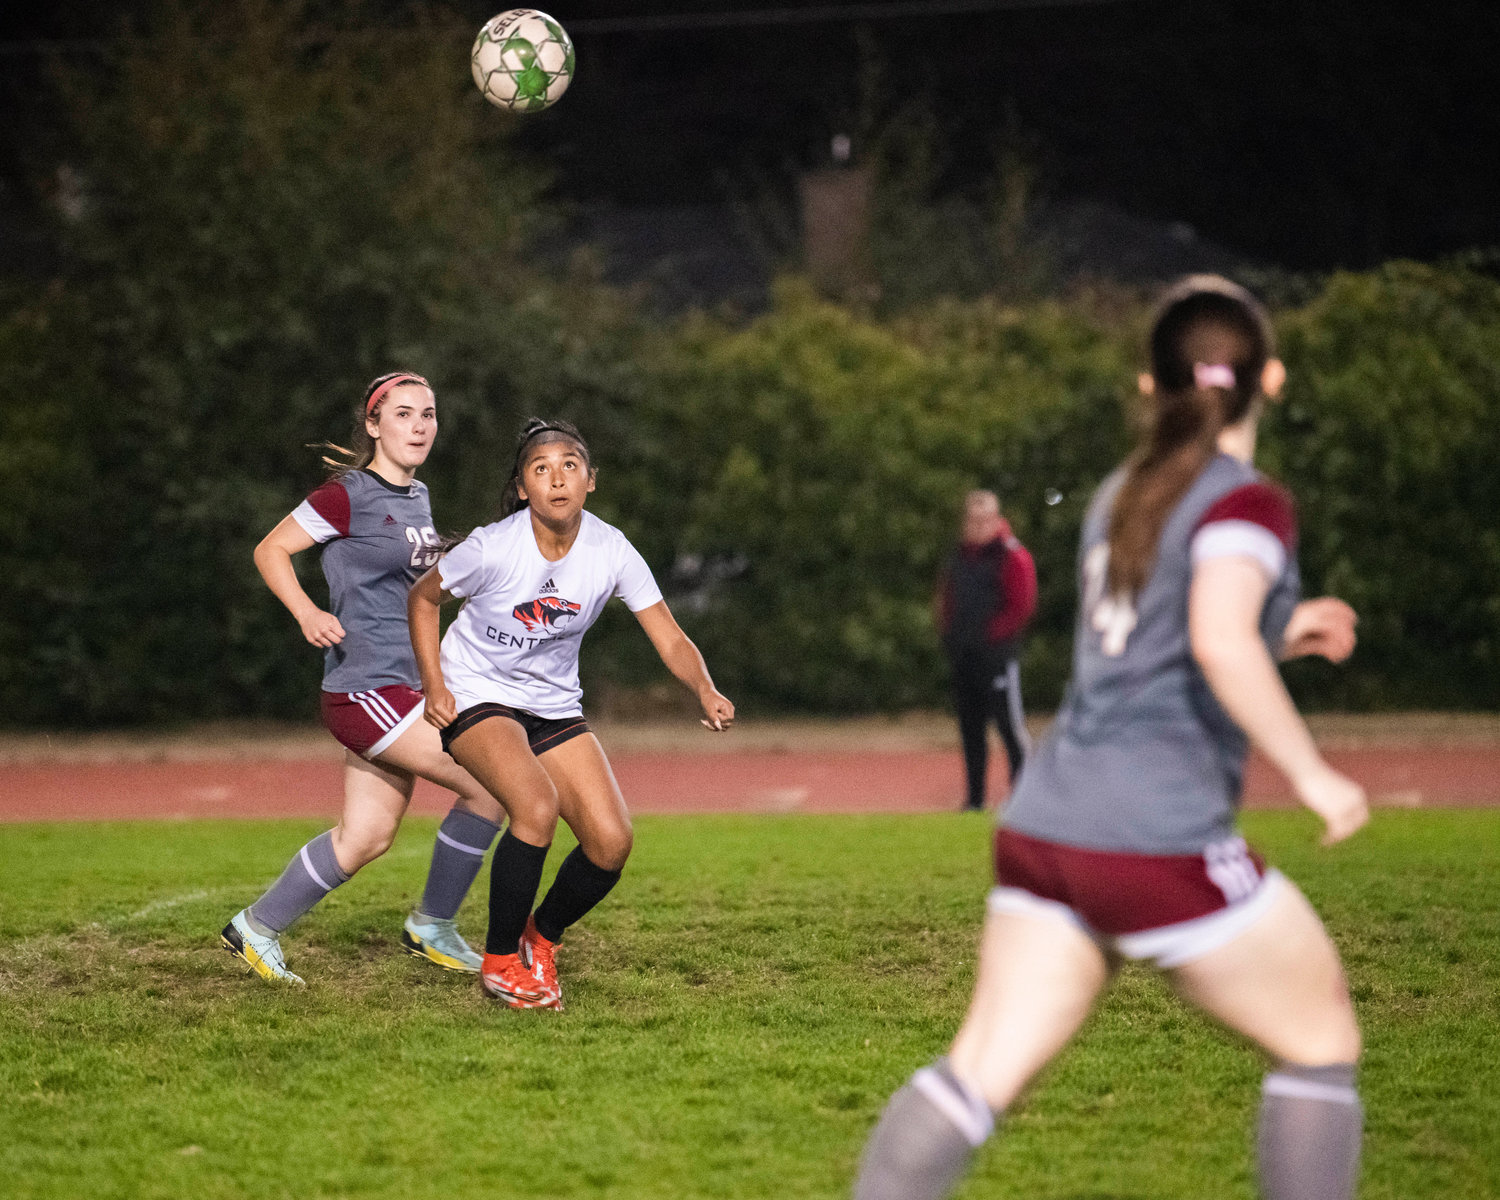 Tigers and Bearcats look to control the ball during the Chronicle Cup rivalry game in Chehalis on Oct. 18.